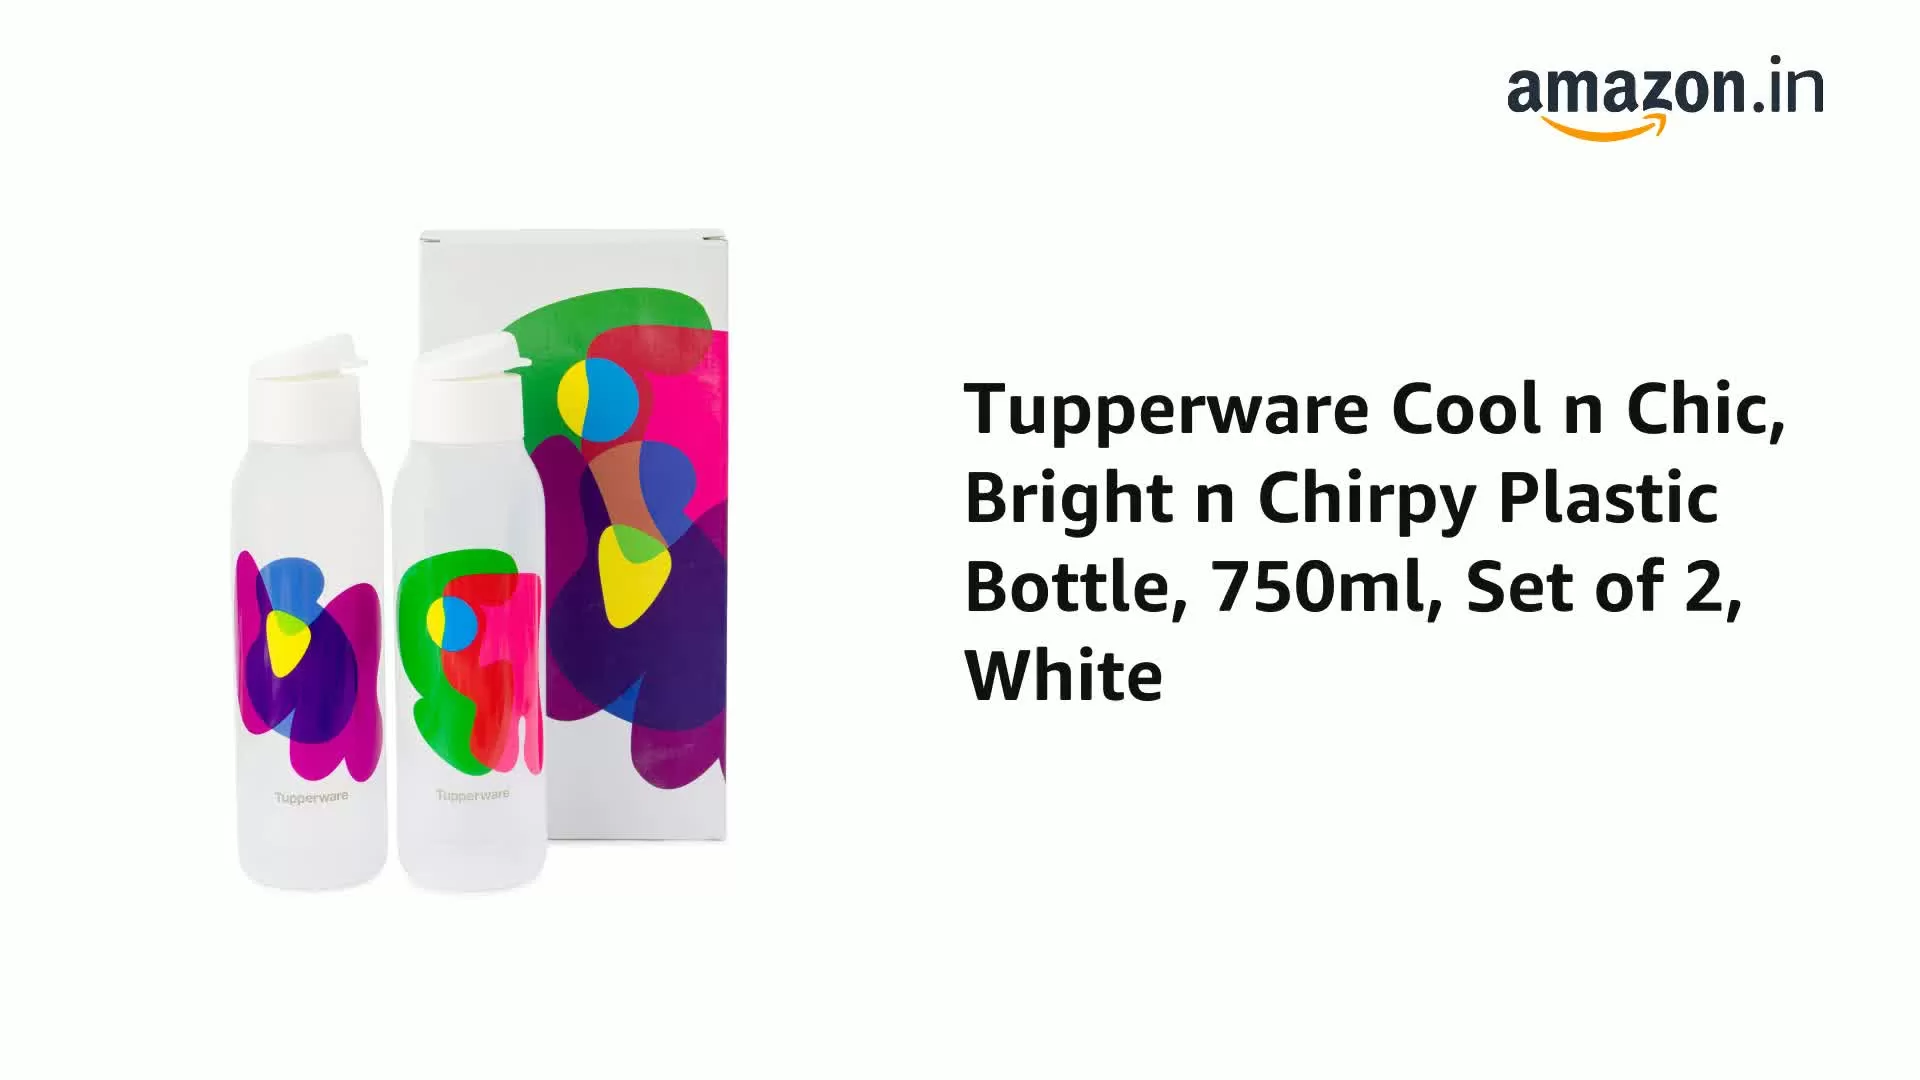 Cool n Chic Bright n Chirpy Plastic Bottle 750ml Set of 2 White, 2 image